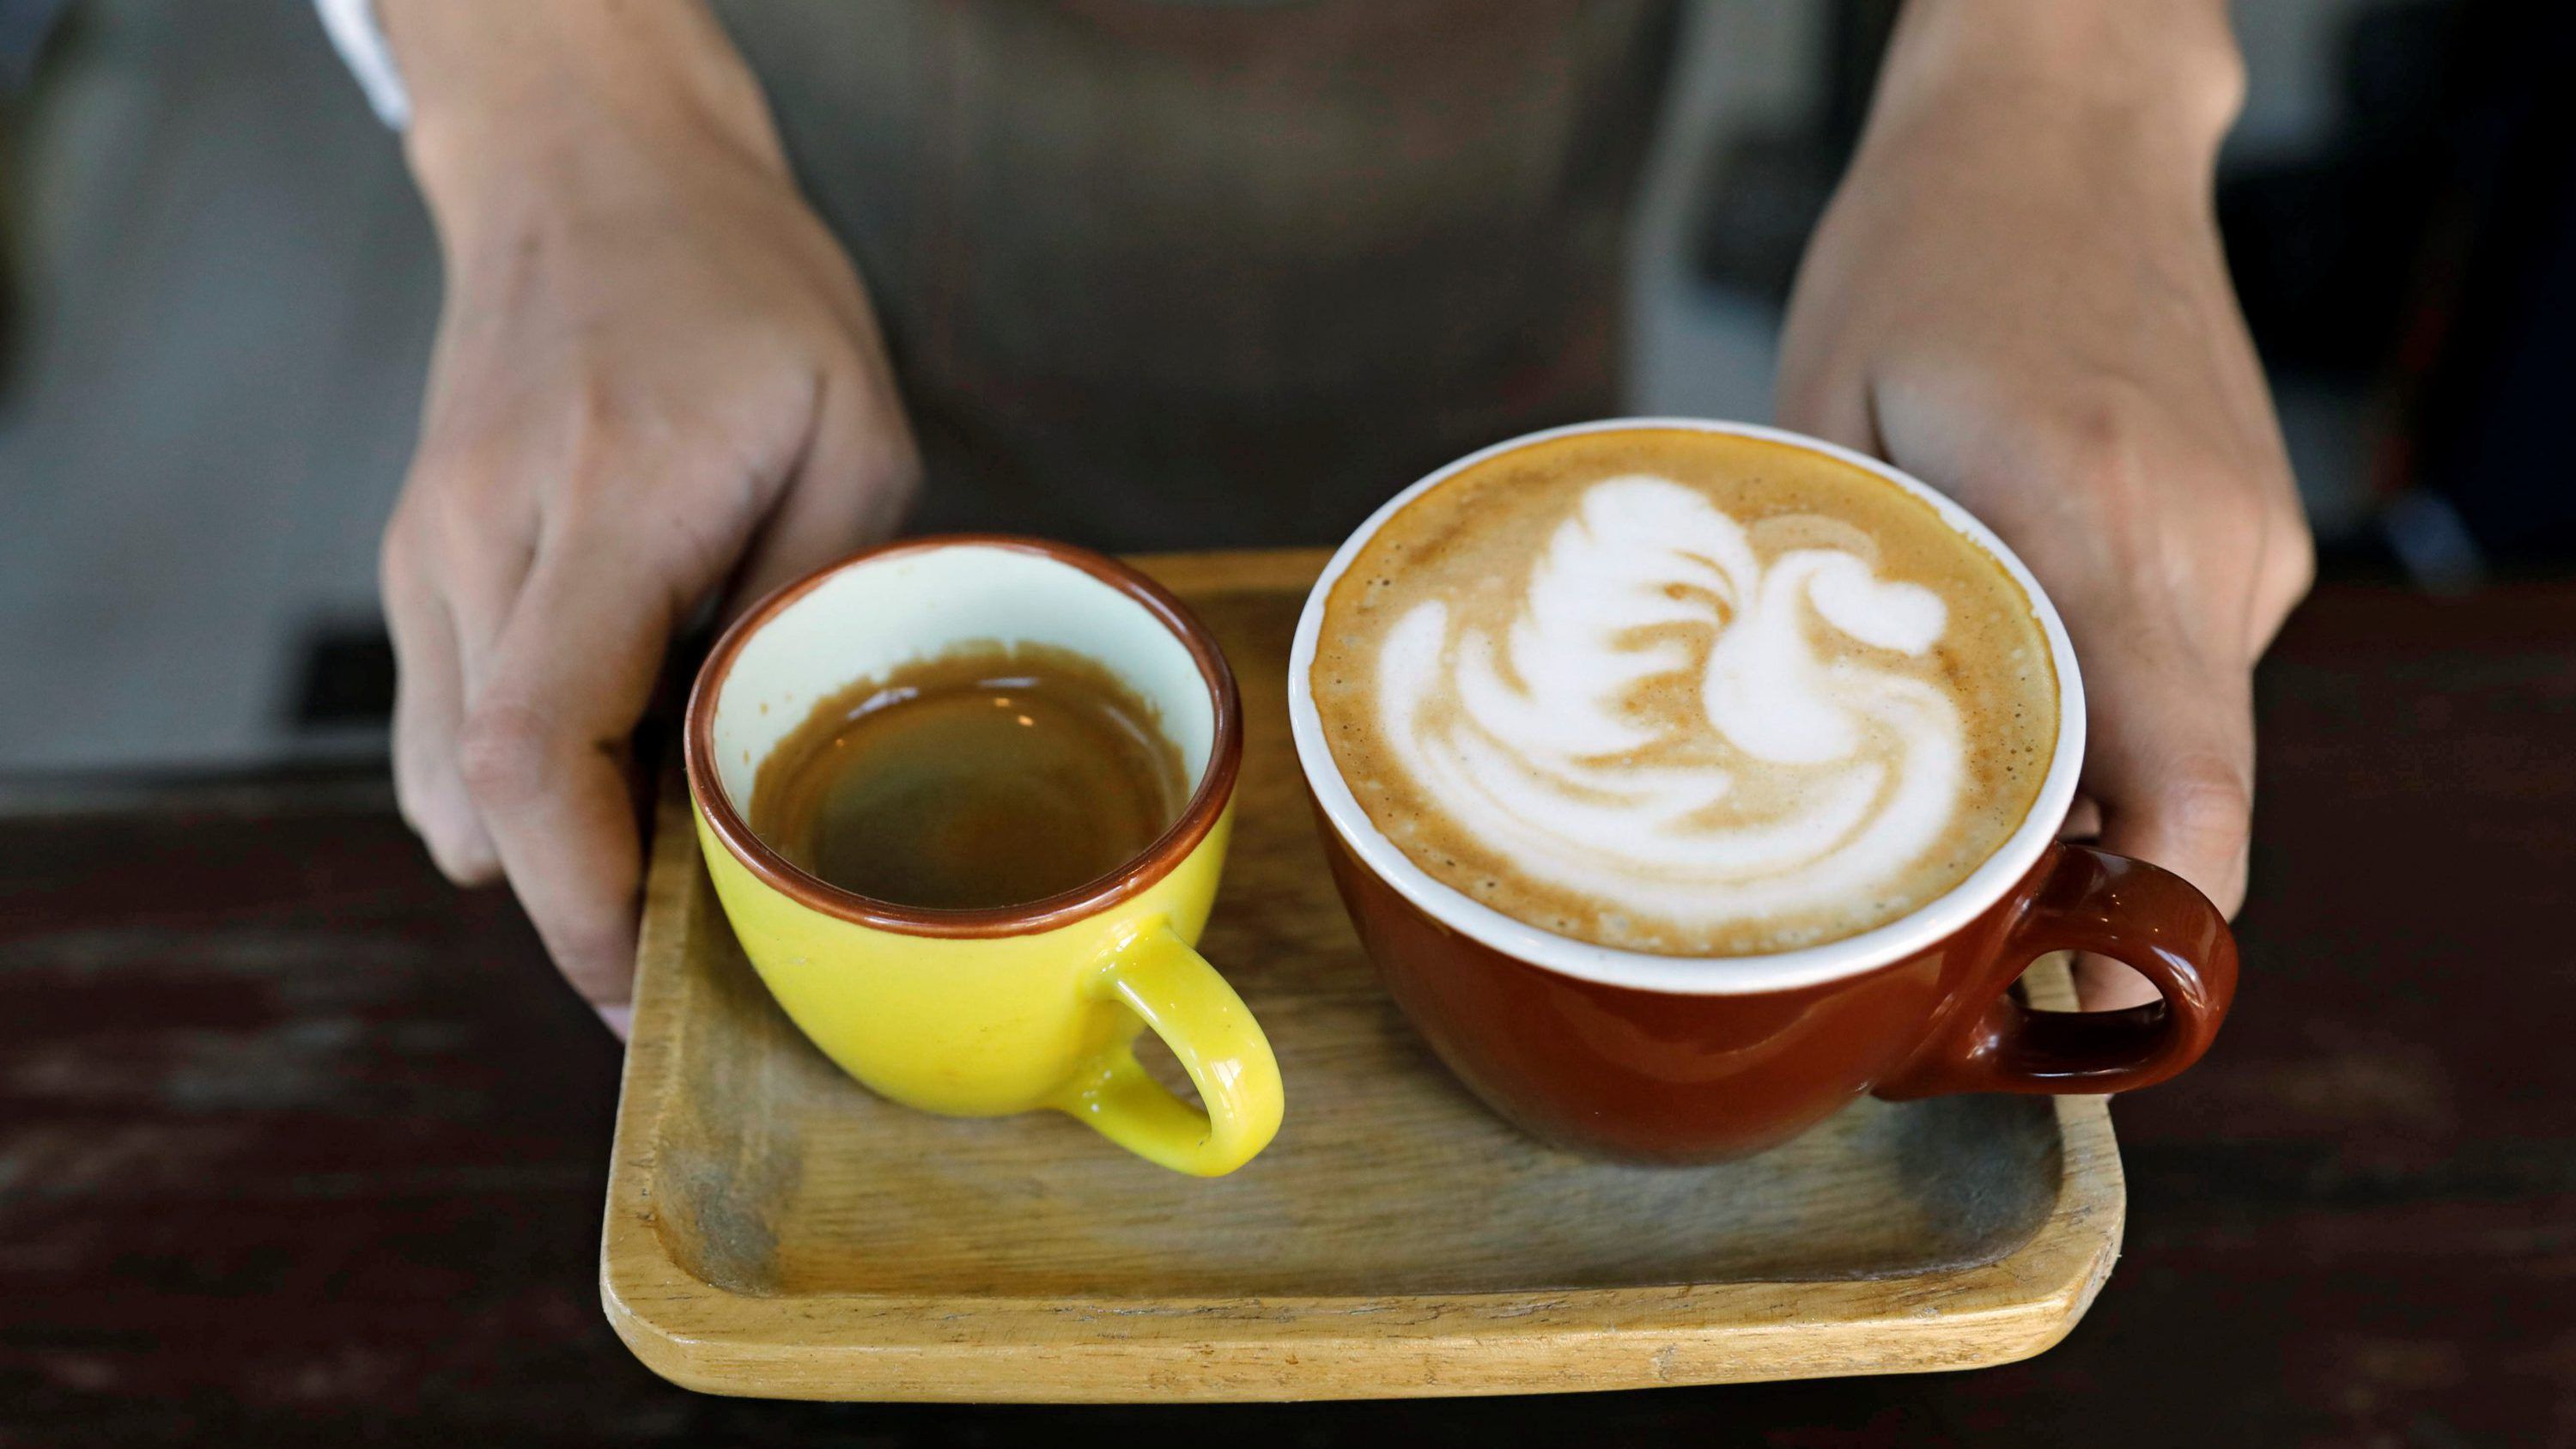 VIDEO: The Local - COFFEE SHOPS across Chicago